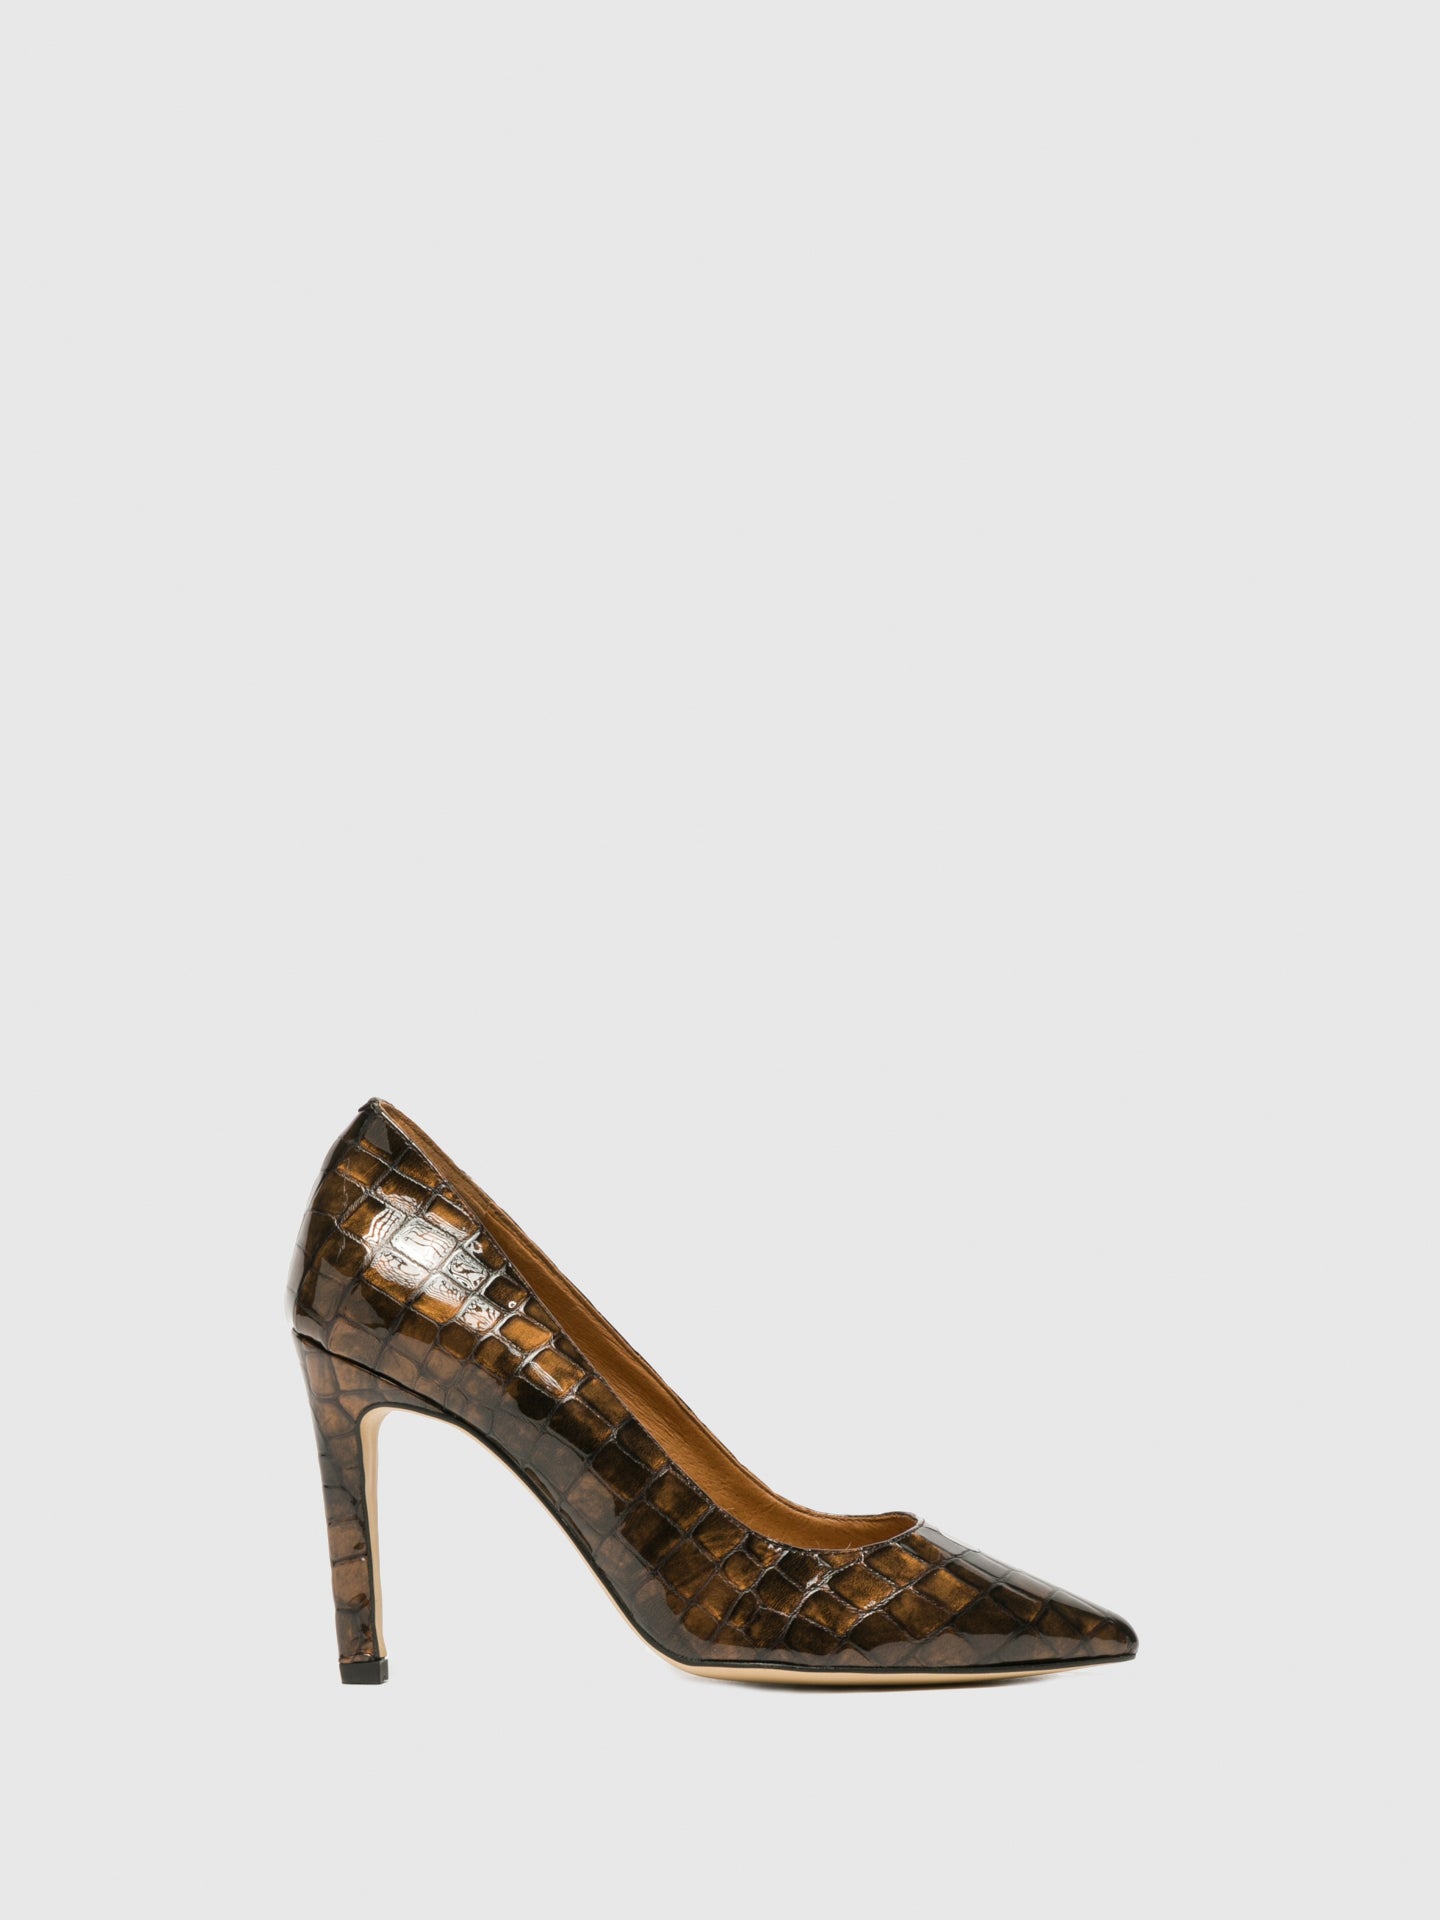 Sofia Costa Brown Pointed Toe Shoes